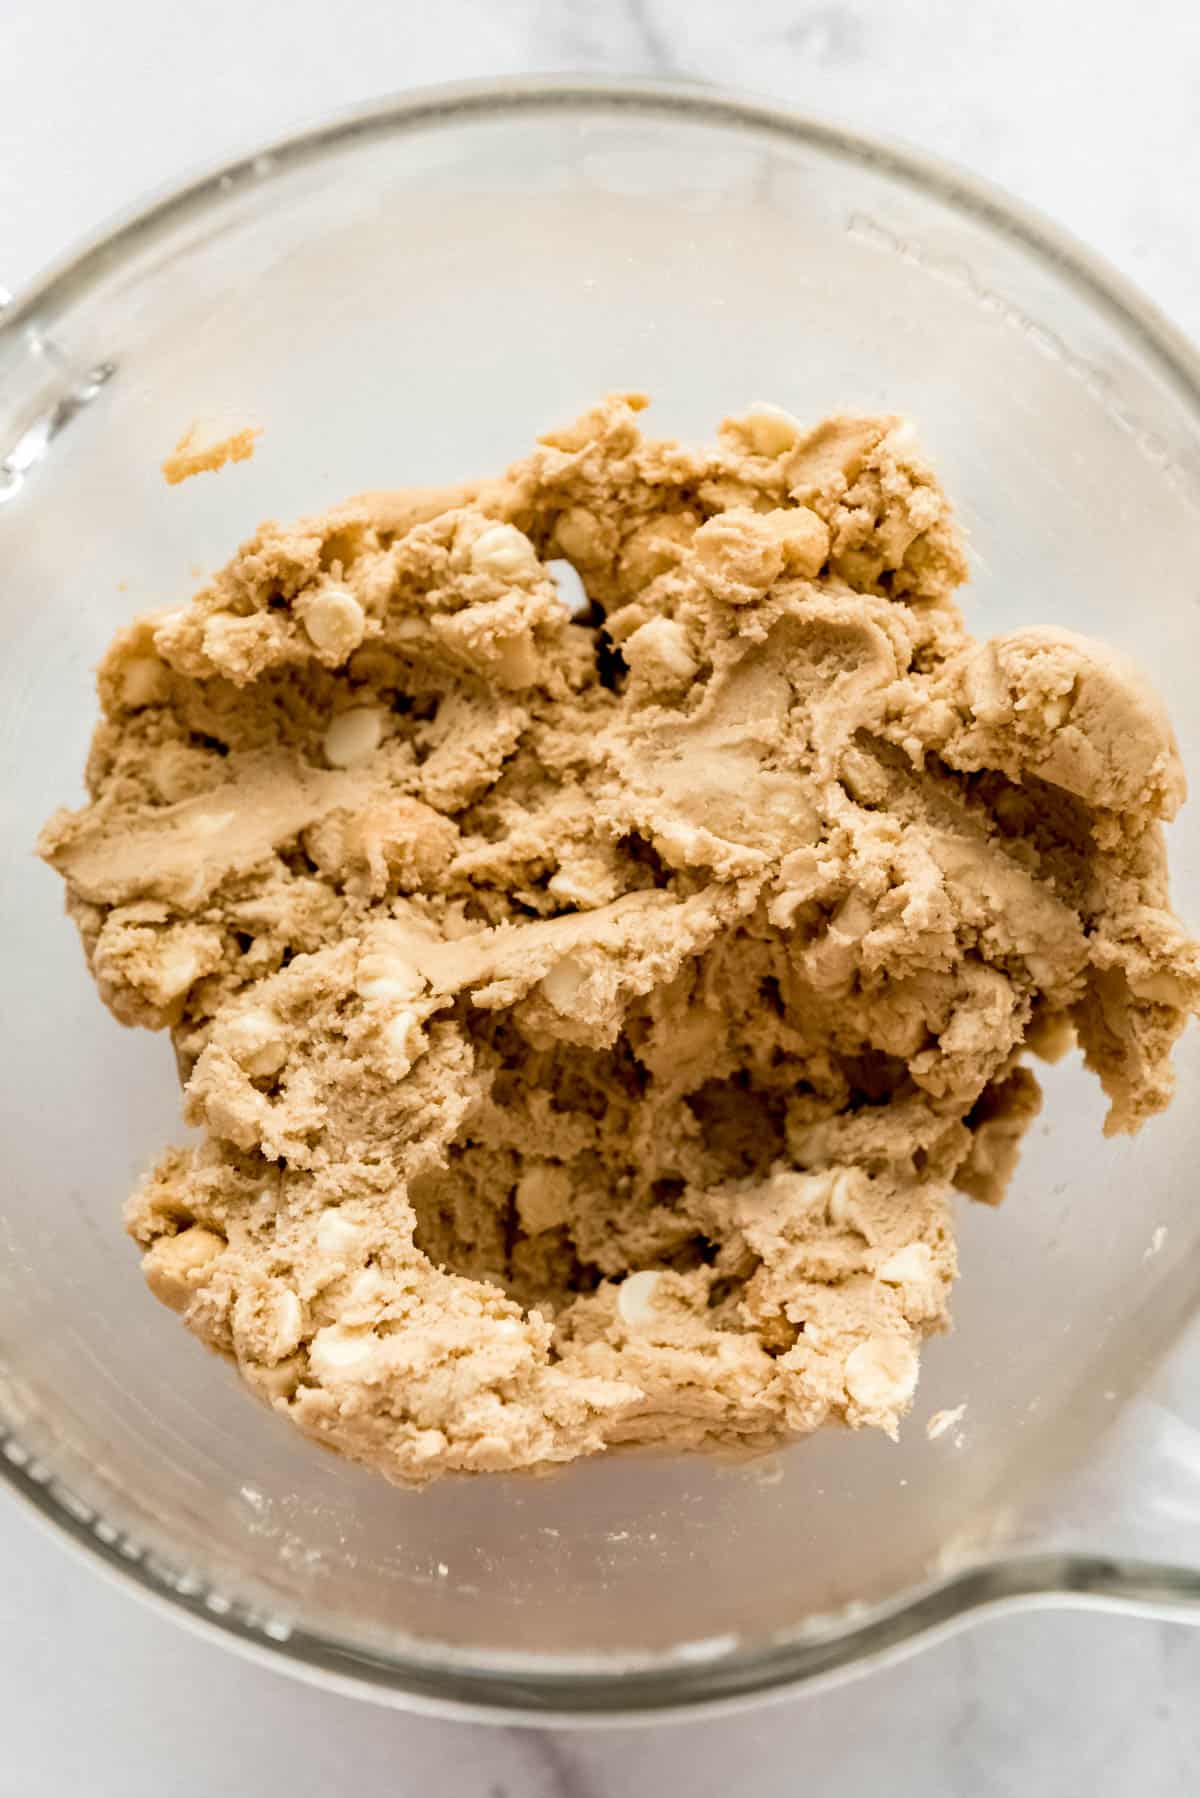 White chocolate macadamia nut cookie dough in a glass mixing bowl.